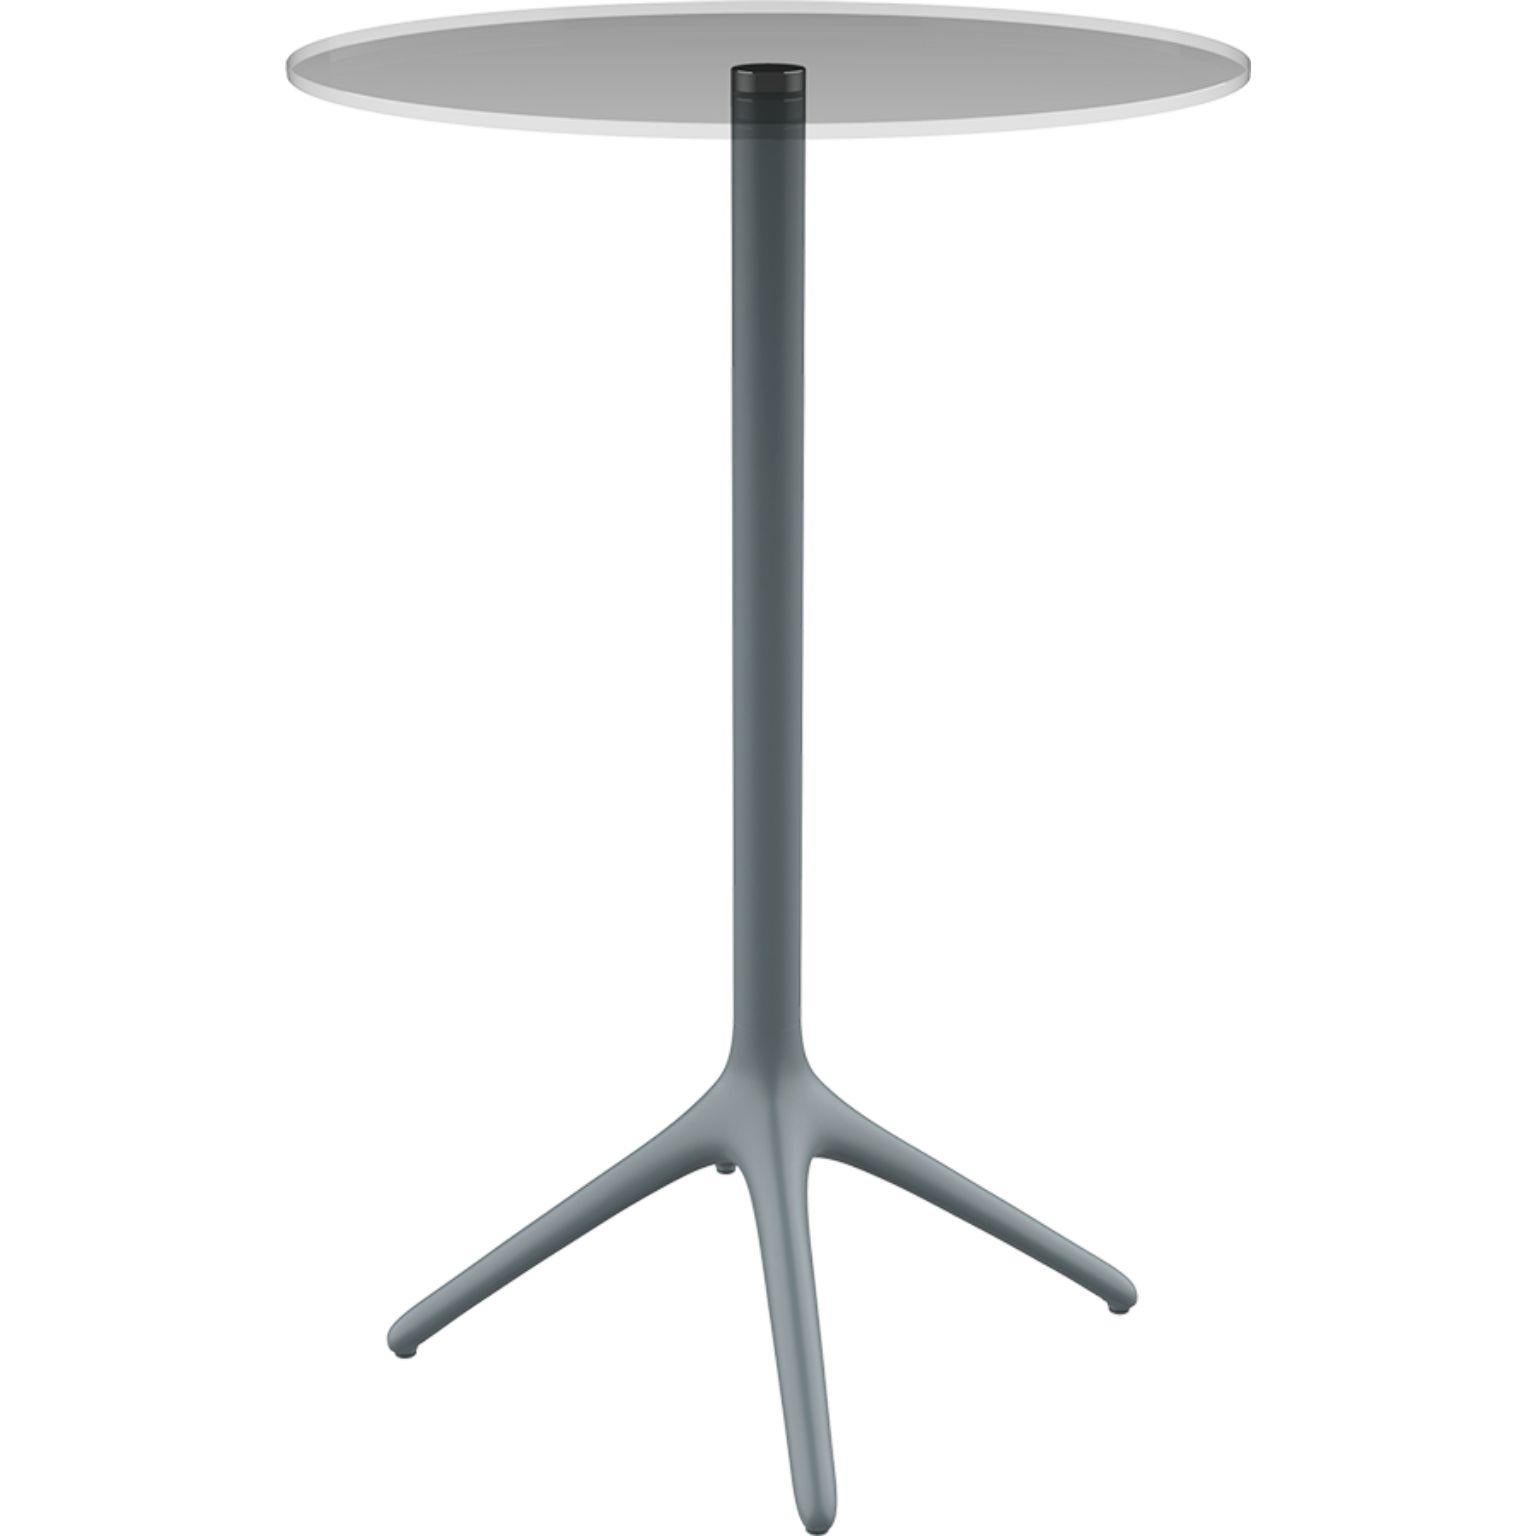 Uni grey table 105 by MOWEE
Dimensions: D 45.5 x H 105 cm
Material: Aluminium, tempered glass
Weight: 6.2 kg
Also available in different colours and finishes. Collapsable version available.

A table designed to be as versatile as possible and